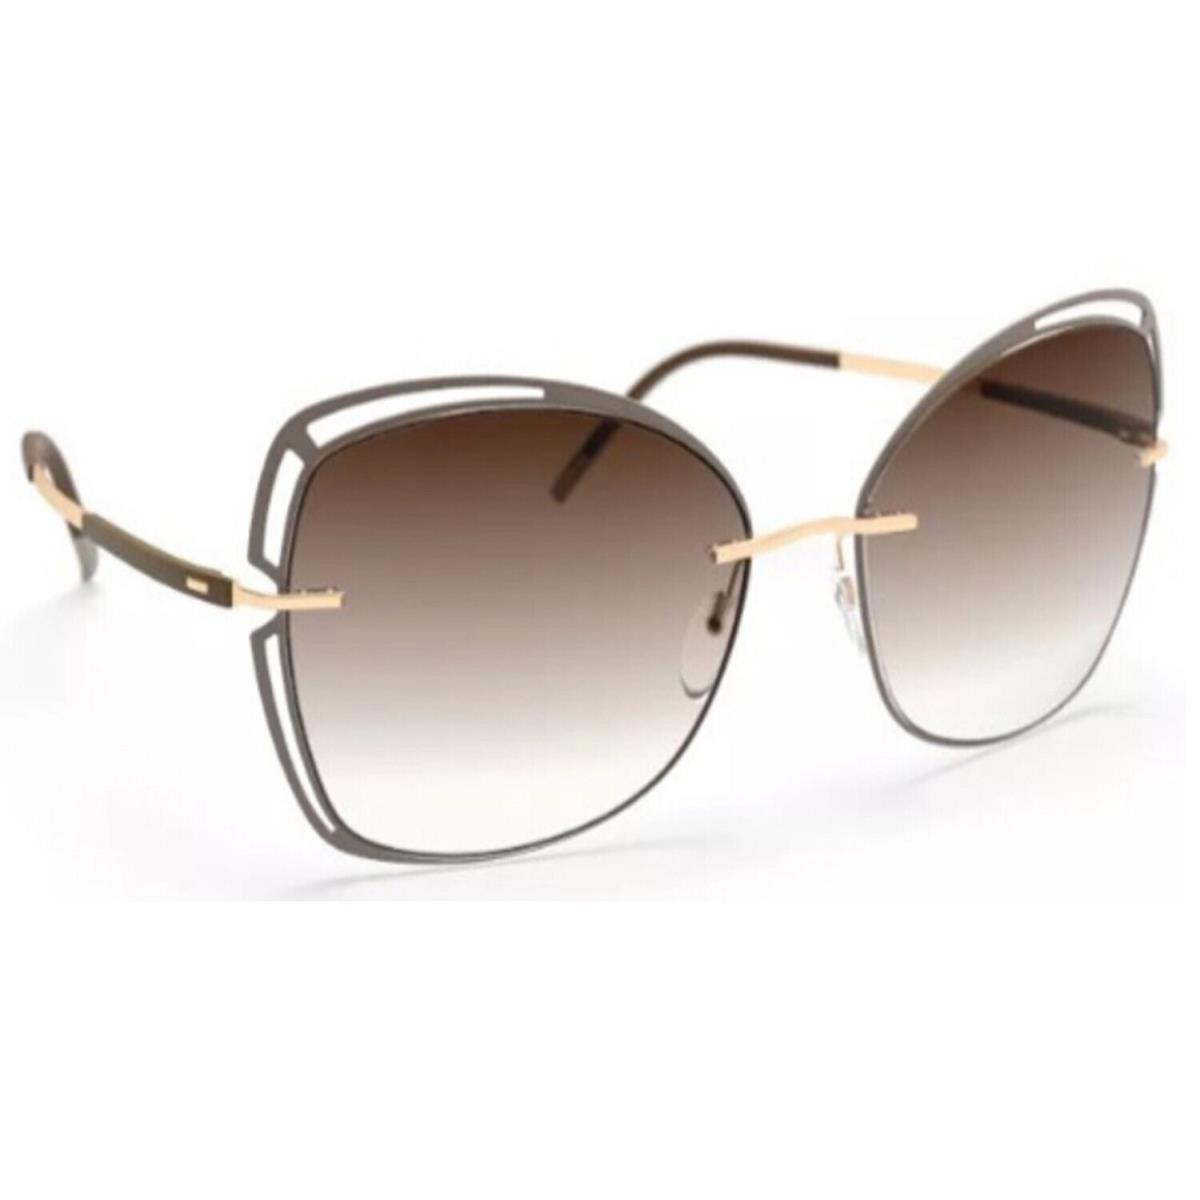 Silhouette Sunglasses Accent Shades 58/17/135 Taupe Brown Gold 8177/75-6040